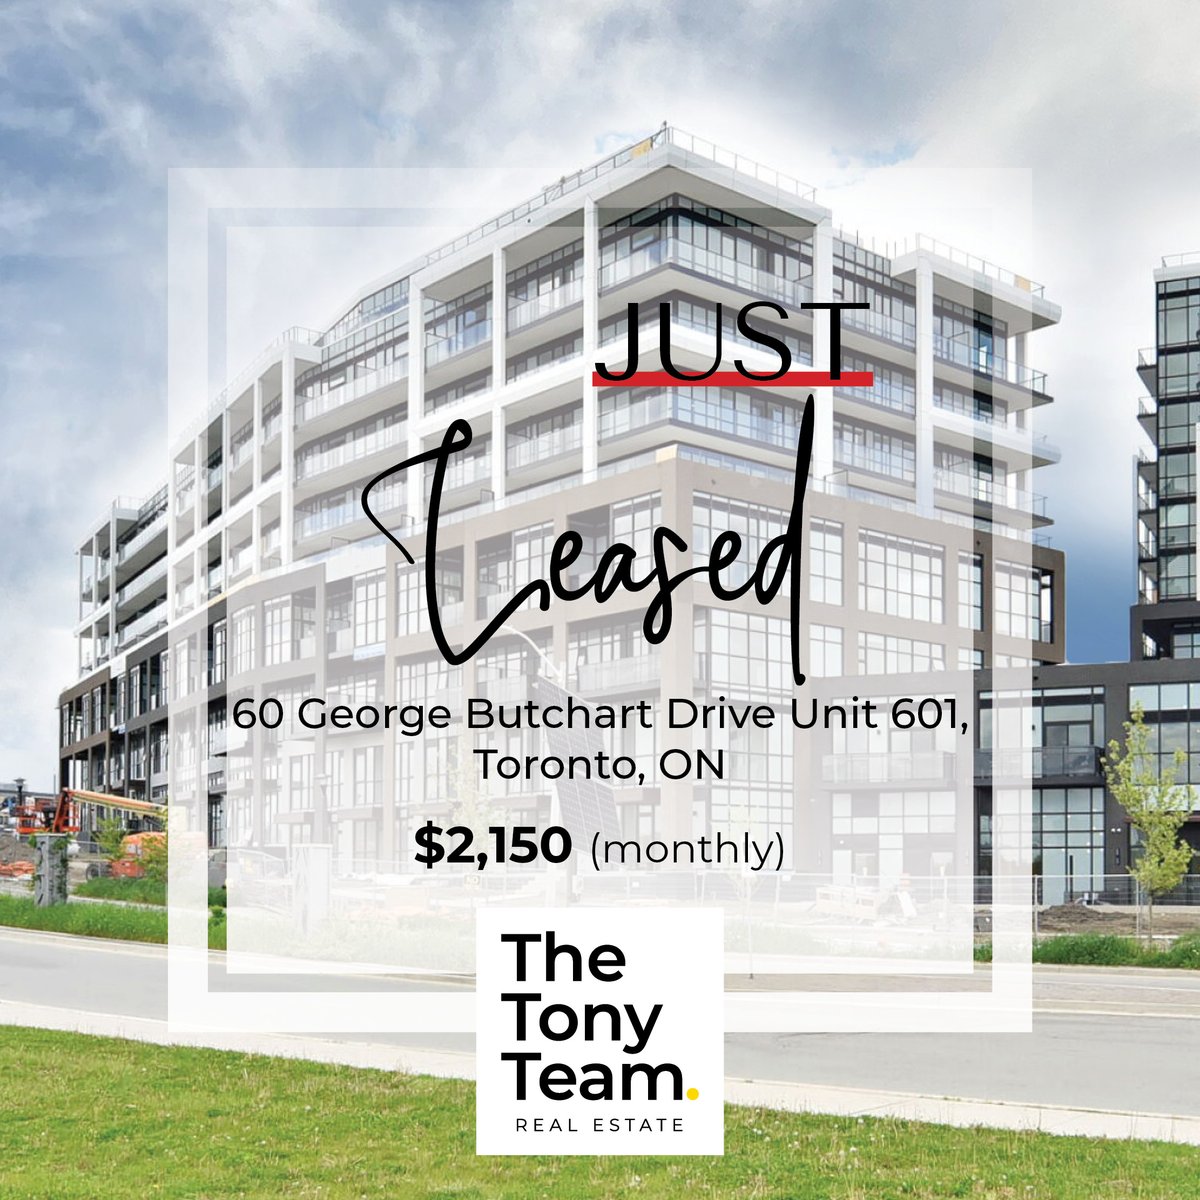 🔈 Just Leased

📍60 George Butchart Drive Unit 601, Toronto

📞 Call me to secure the best investment options today!!

#toronto #justleased #investmentproperty #smartinvestment #remax #aboutowne